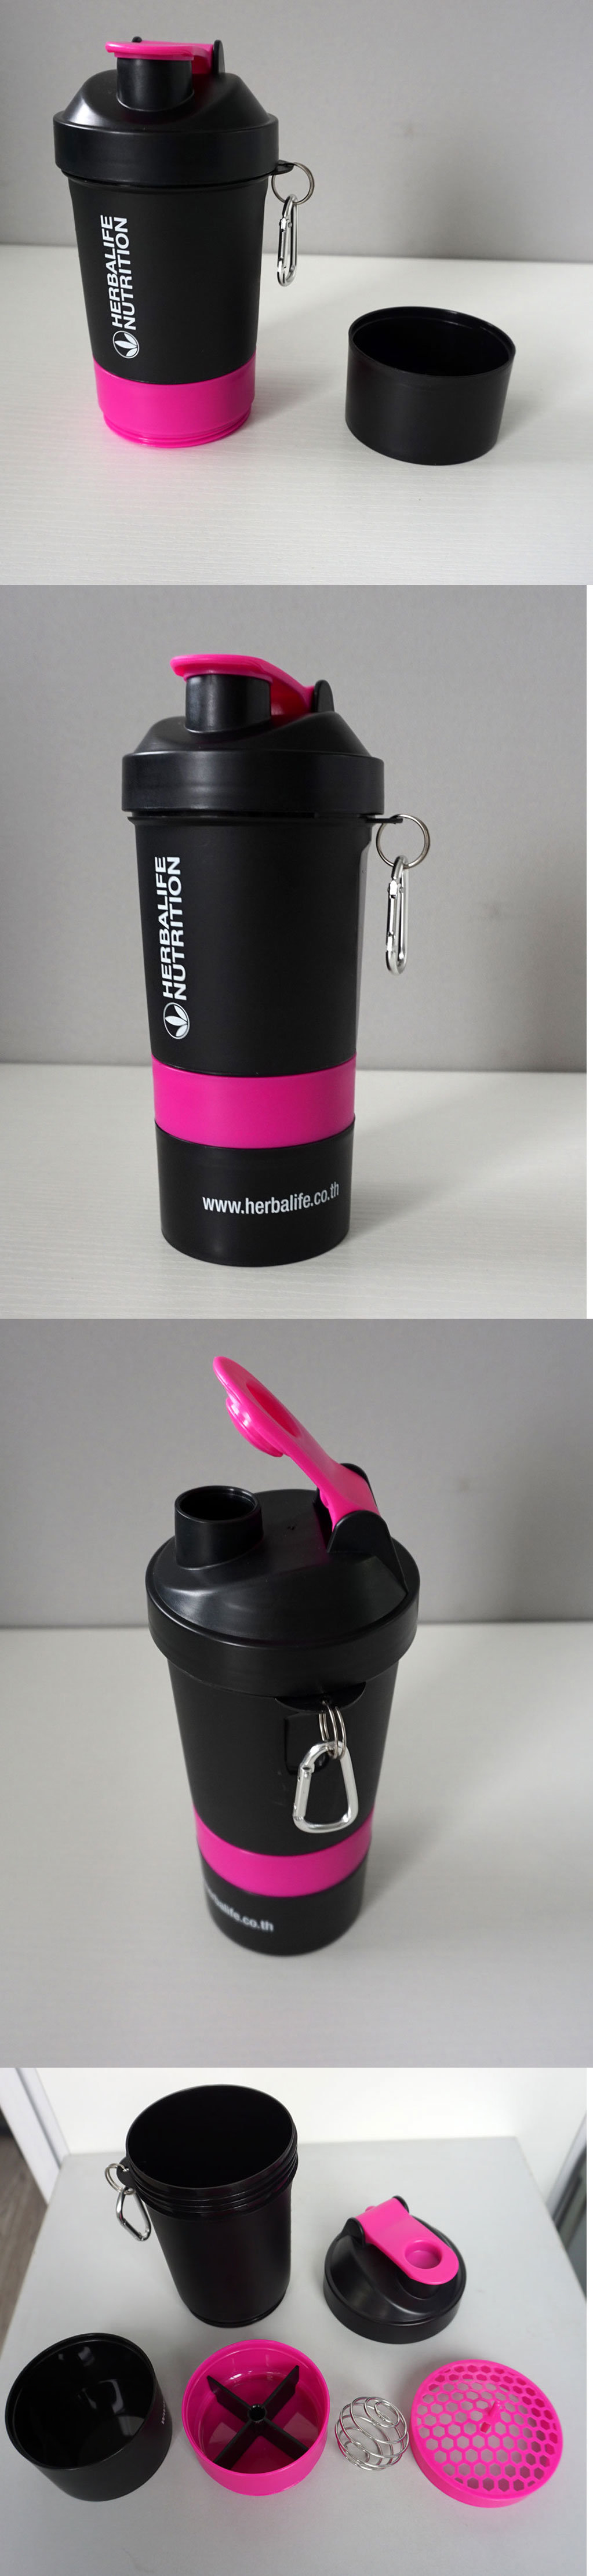 Top Quality Promotion Shaker School Water Bottle with Two Containers